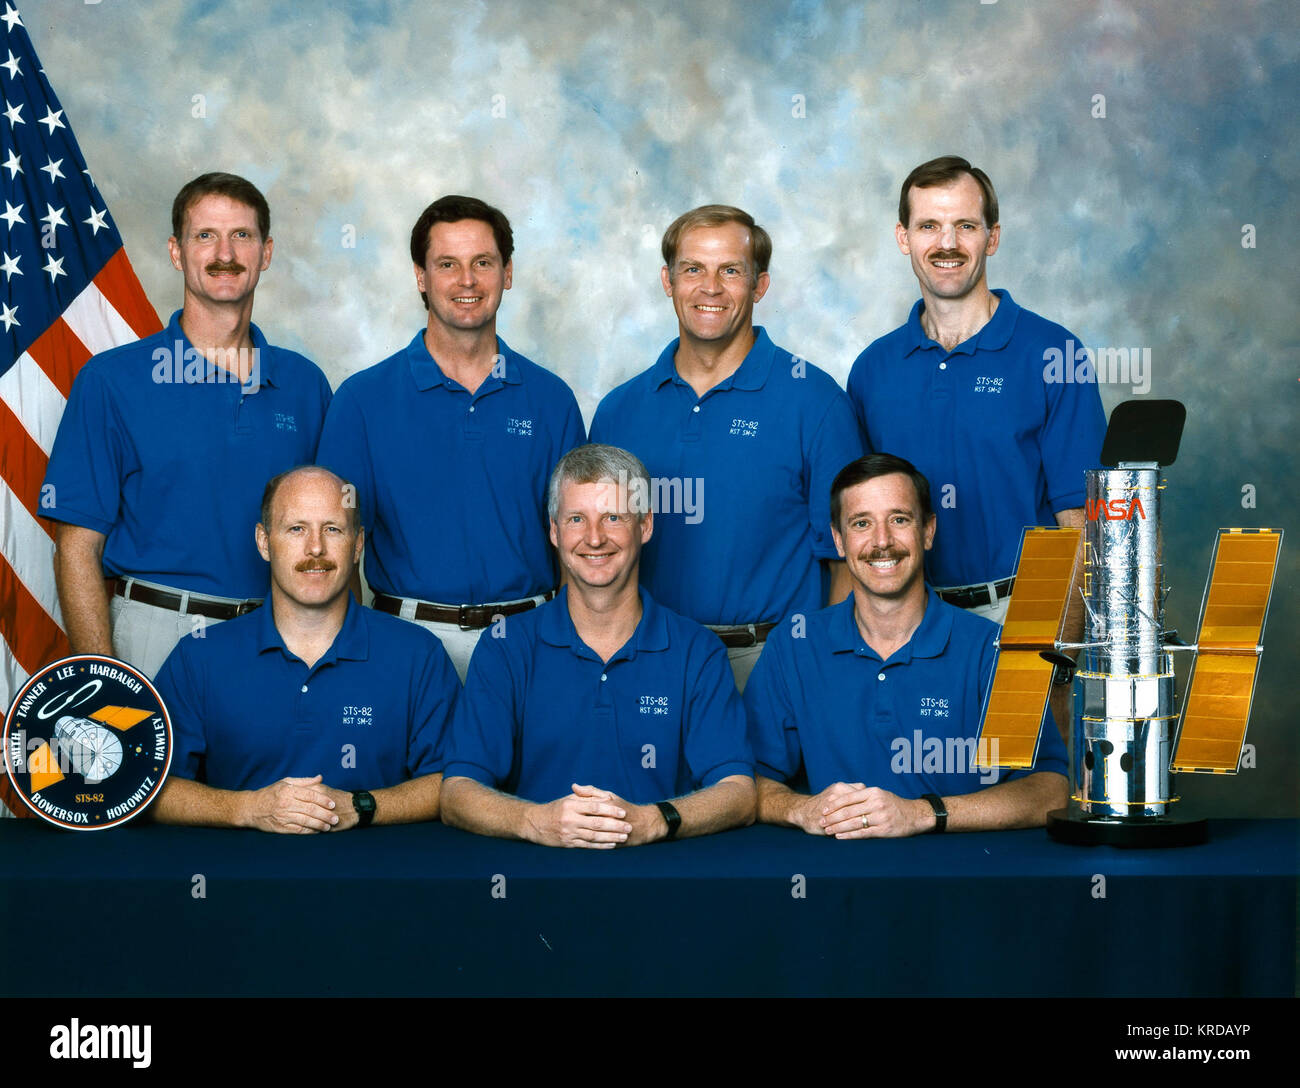 STS-82 CREW PORTRAIT FRONT ROW FROM LEFT: BOWERSOX, KENNETH; HAWLEY, STEVEN; HOROWITZ, SCOTT. BACK ROW: TANNER, JOSEPH; HARBAUGH, GREGORY; LEE, MARK; SMITH, STEVEN. STS-82 crew Stock Photo